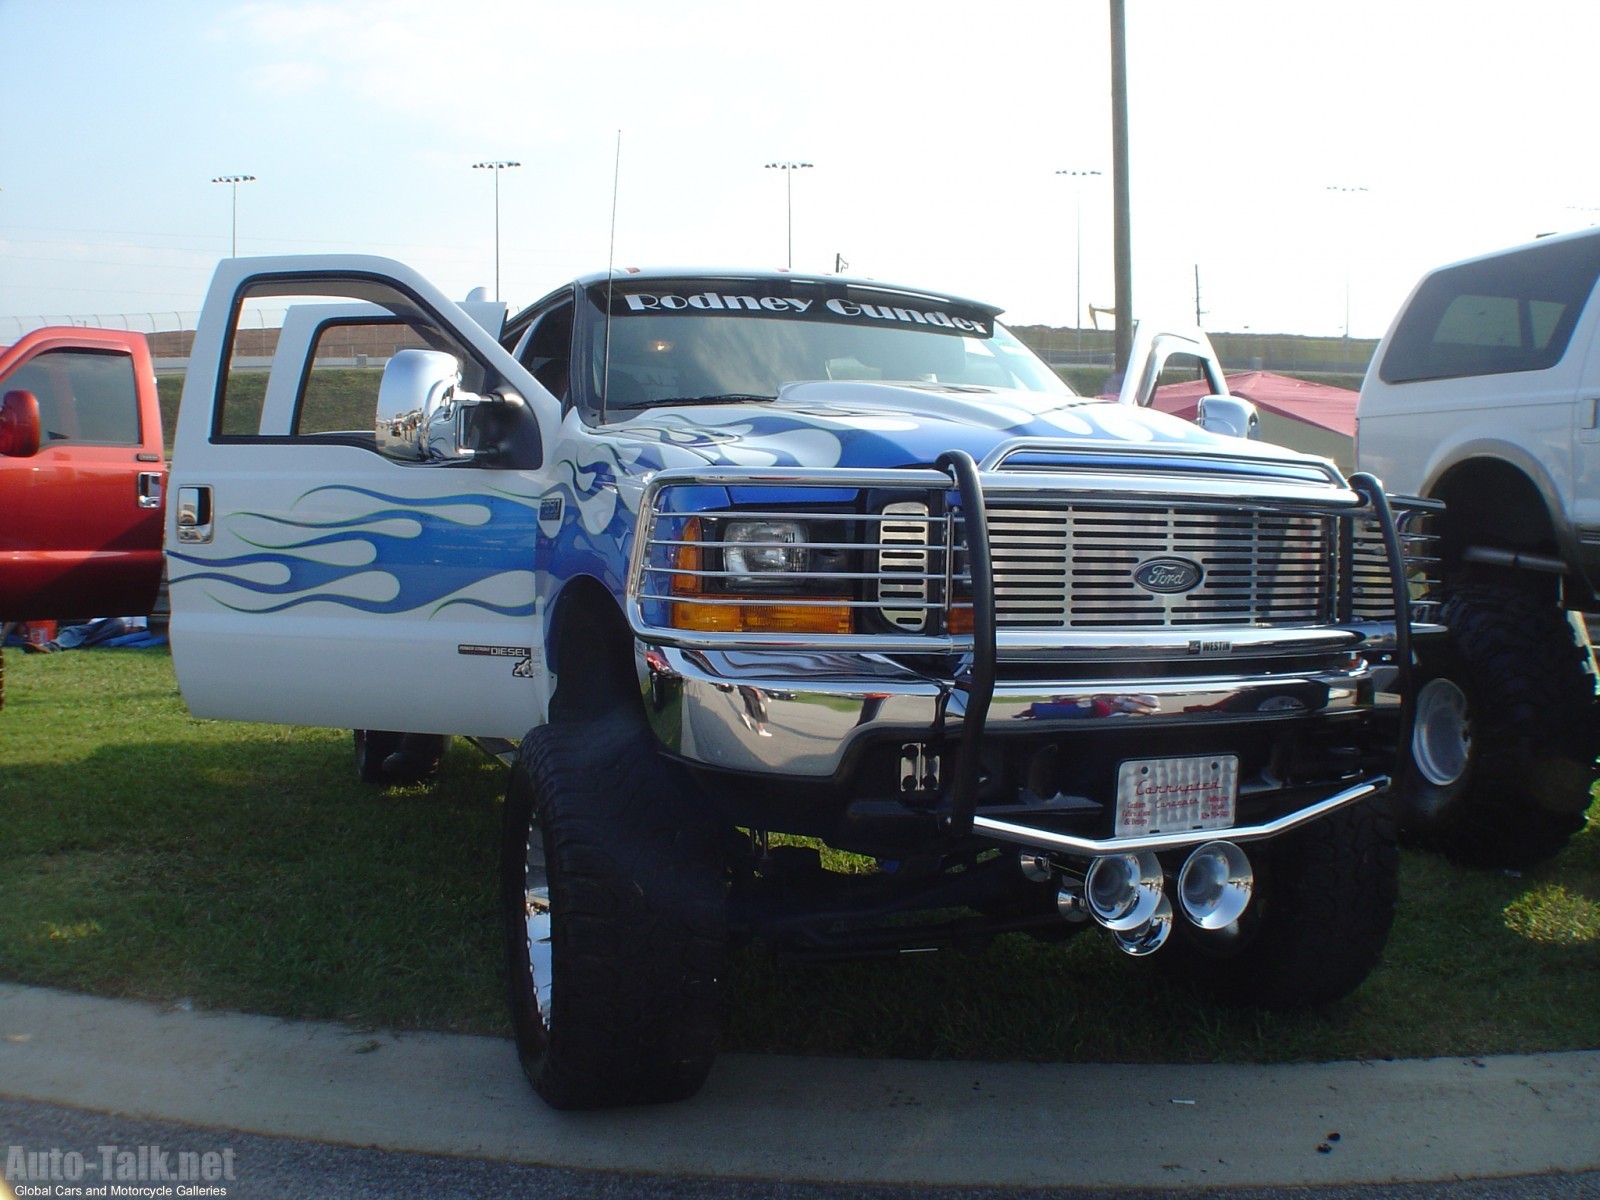 Pictures of Monster Trucks and Autos at Nopi Nationals 2006